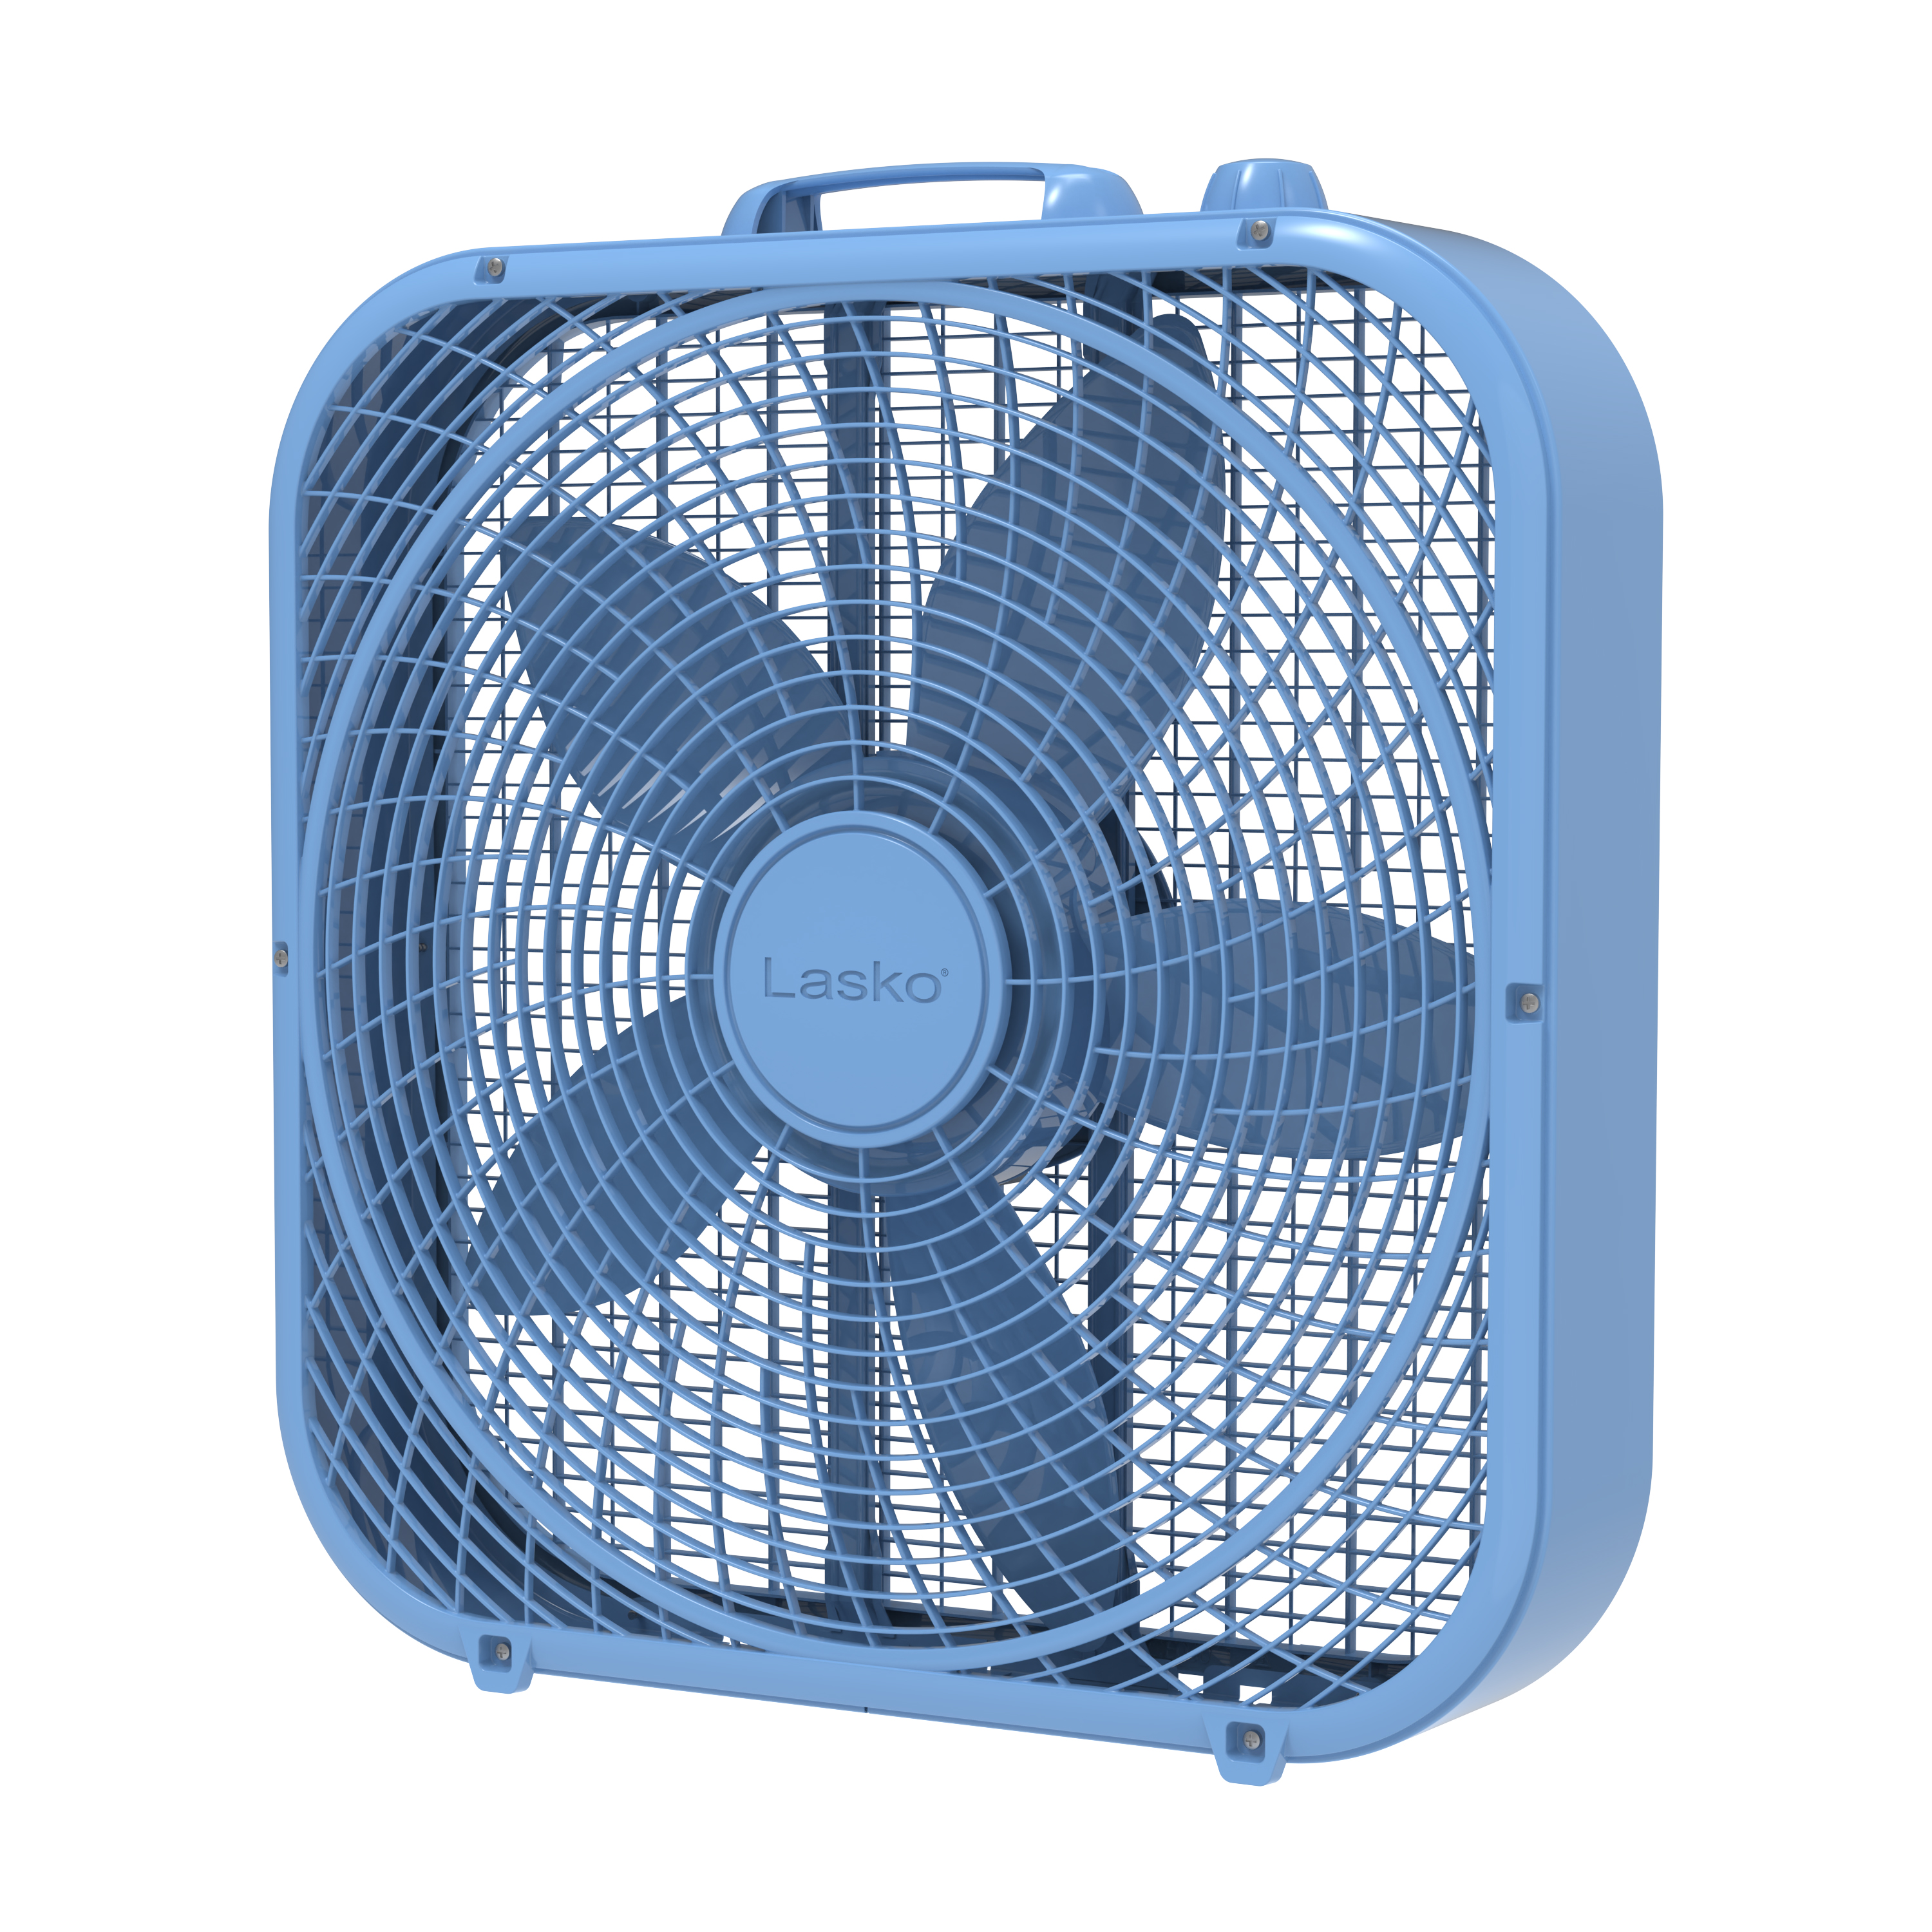 Lasko 20" Cool Colors 3-Speed Box Fan with Weather-Resistant Motor, Blue, 22.5" High, B20310, New - image 4 of 7